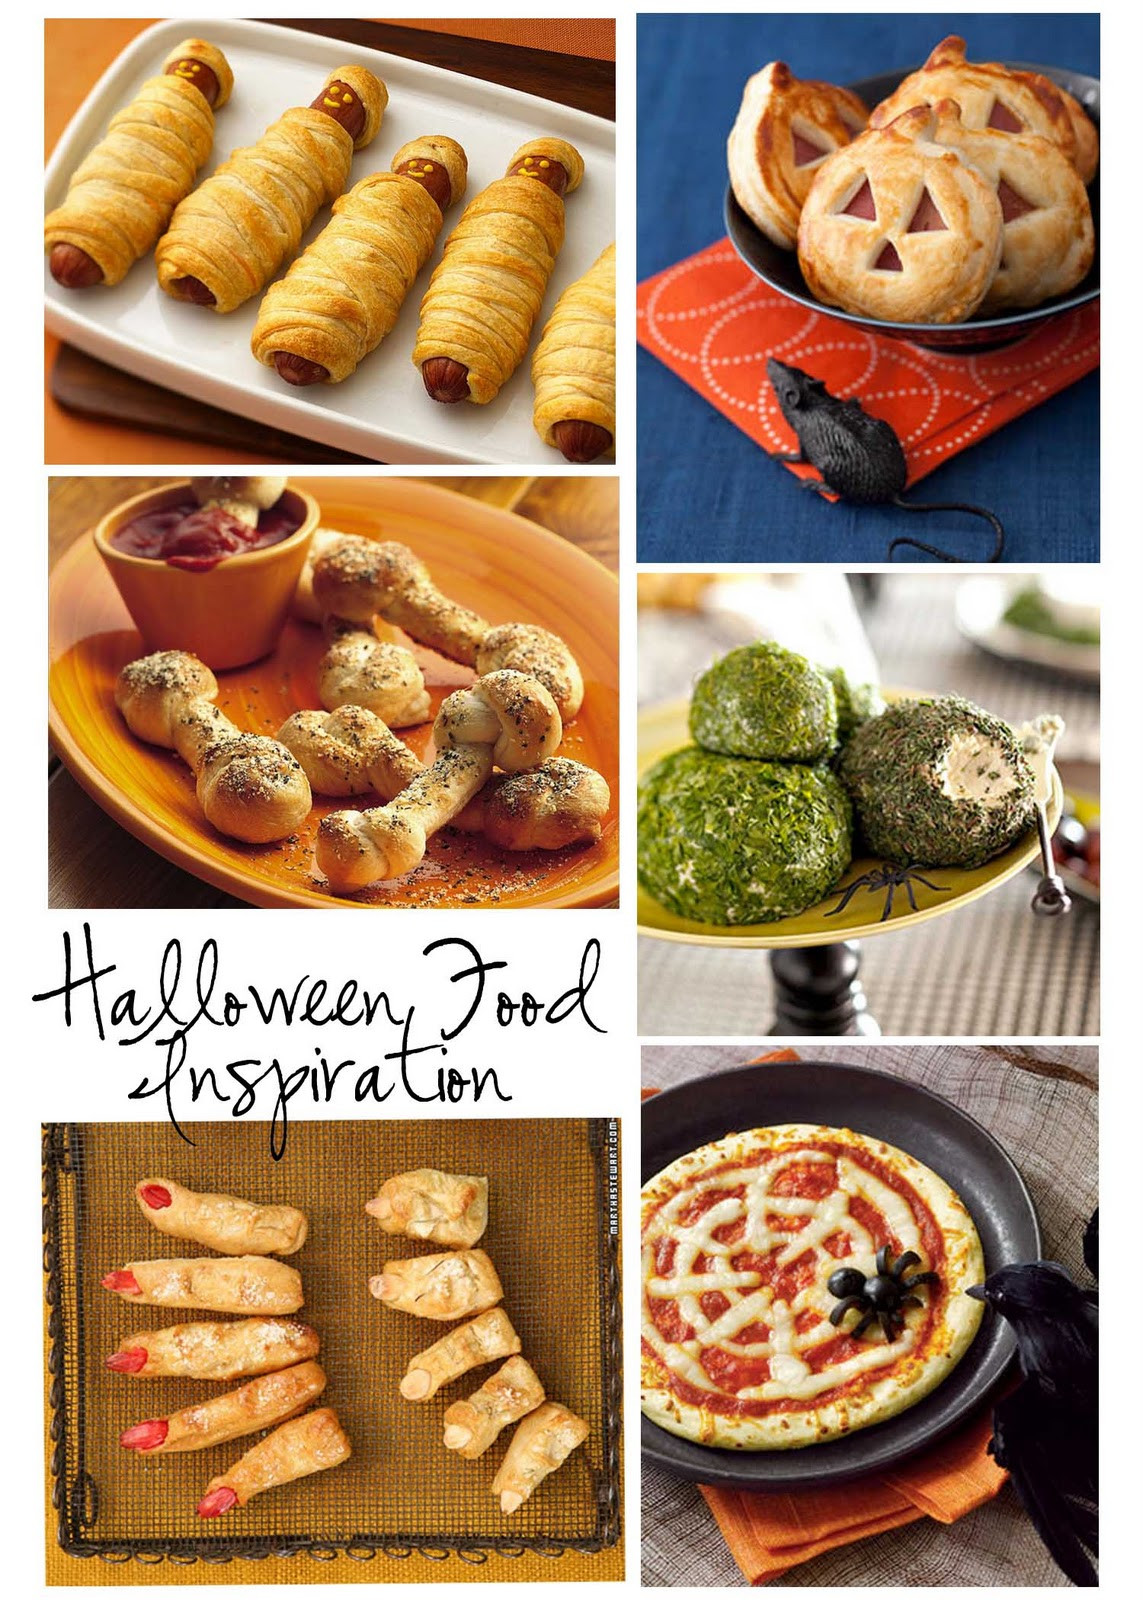 Food Ideas For Halloween Party
 Room to Inspire Spooky Food Ideas